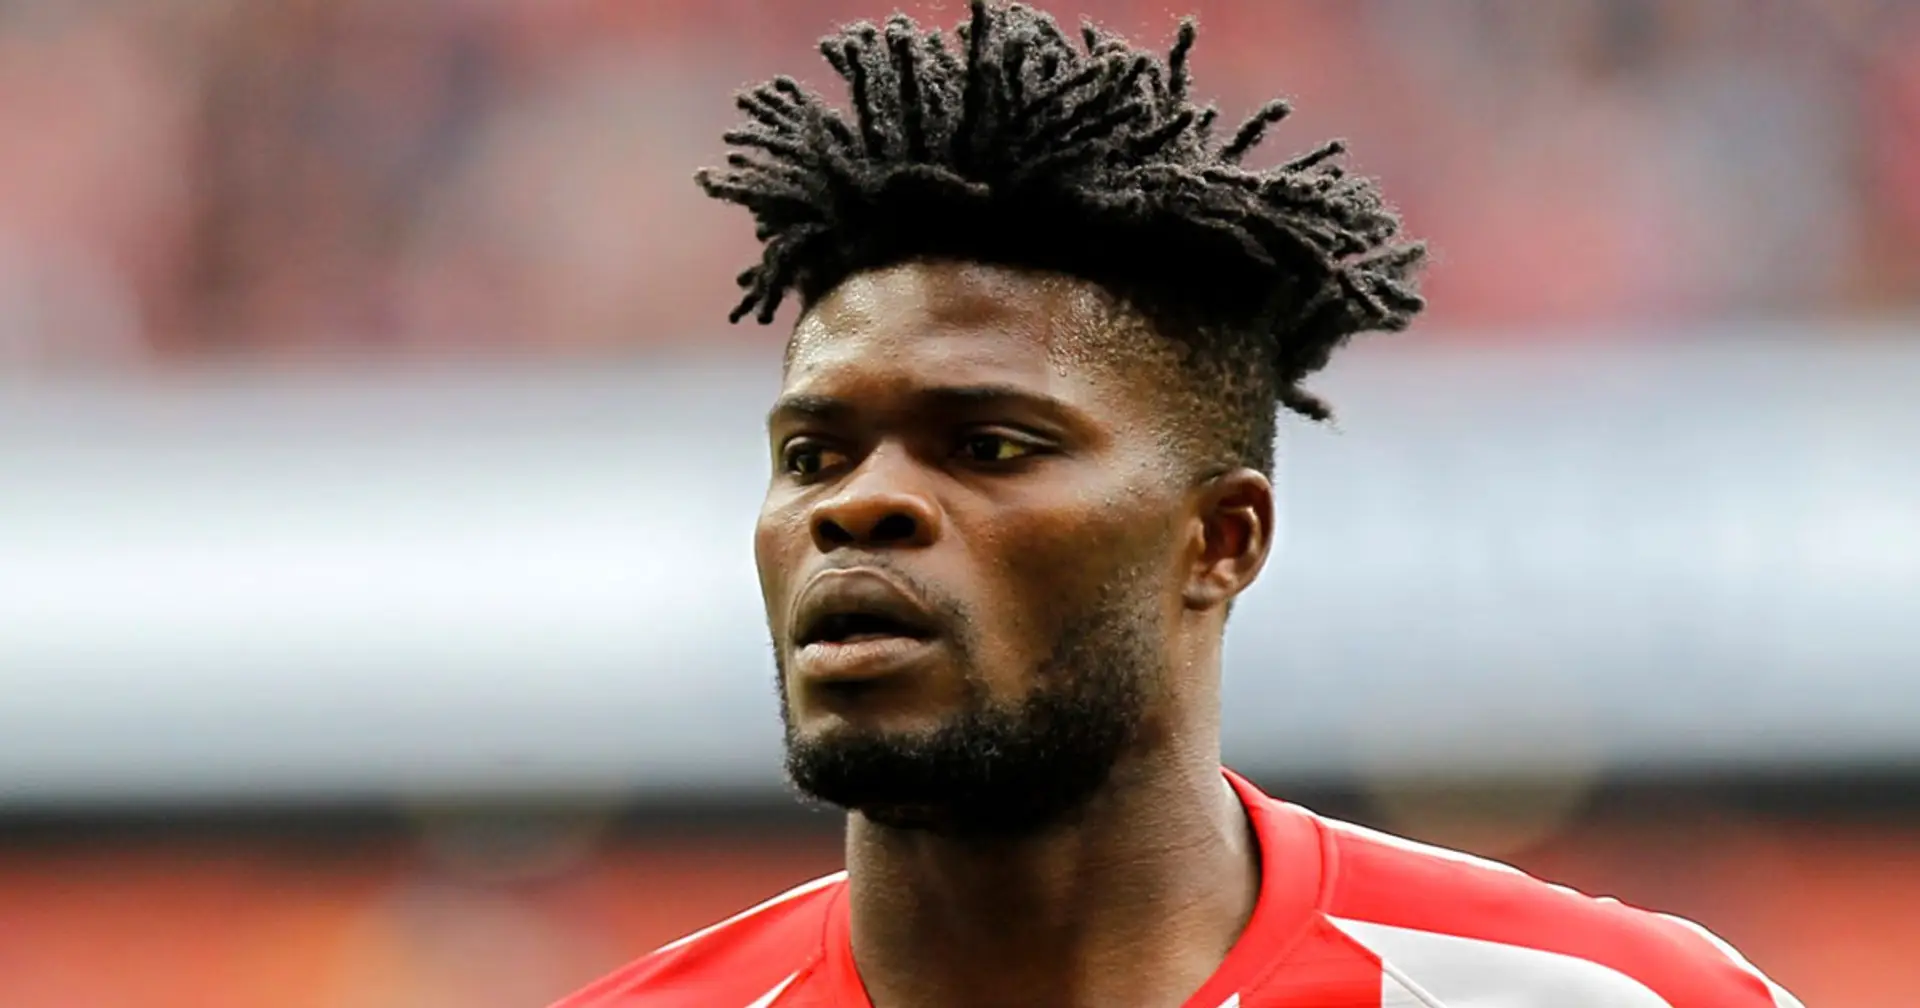 Arsenal 'willing to pay' Thomas Partey's £44.6m release clause as Atletico look for replacement